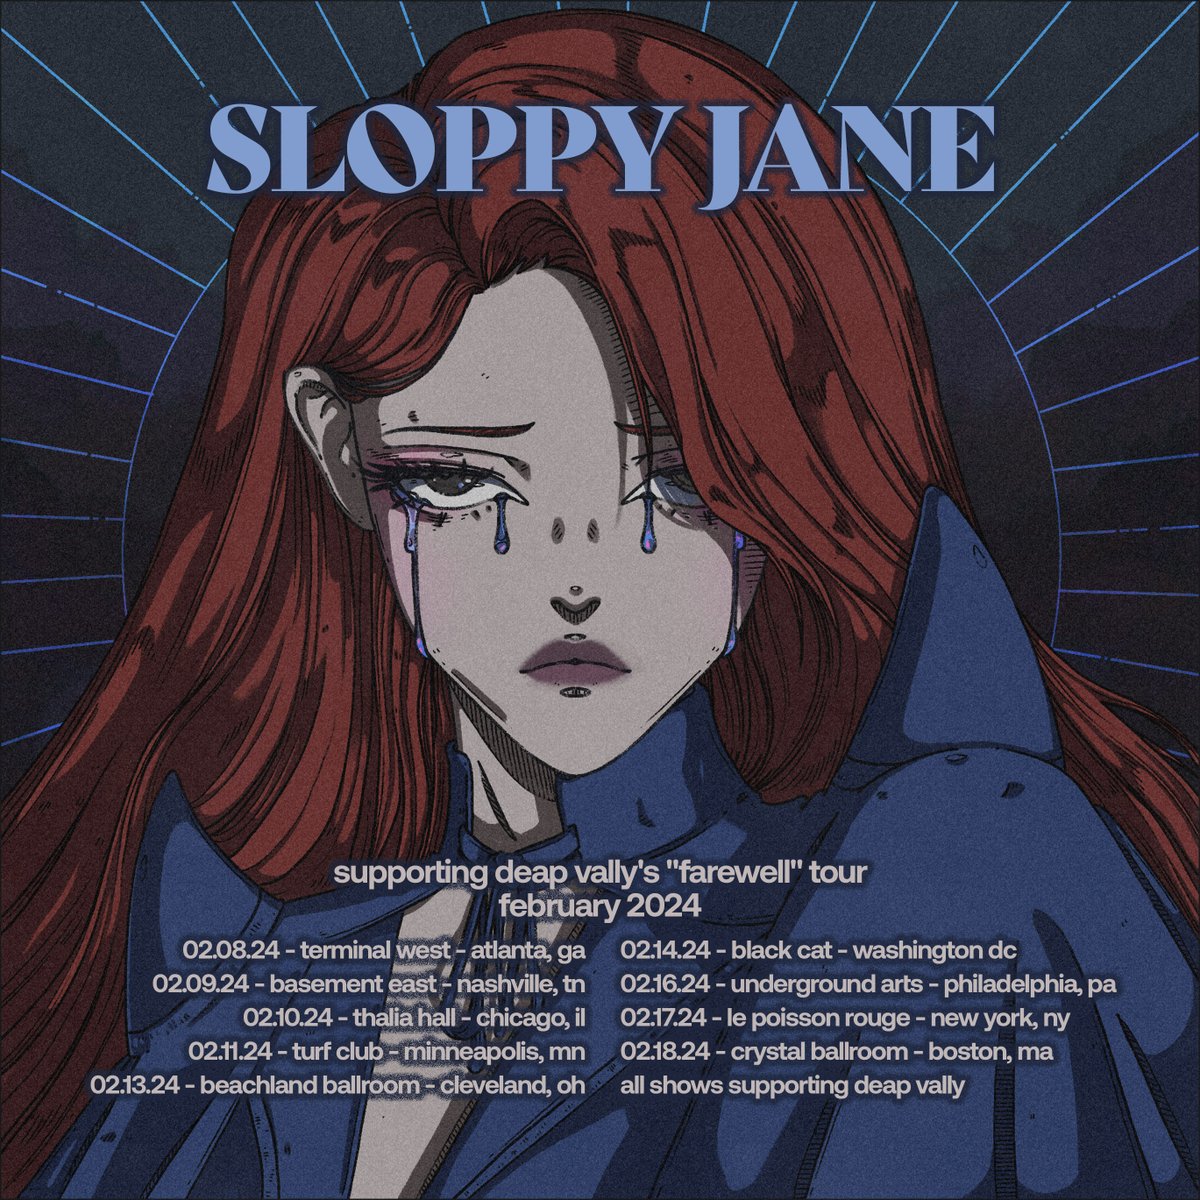 OOO: @sloppyjanemusic will be out on the road with @DeapVally. Haley will be slower than usual responding to emails. sloppyjane.land